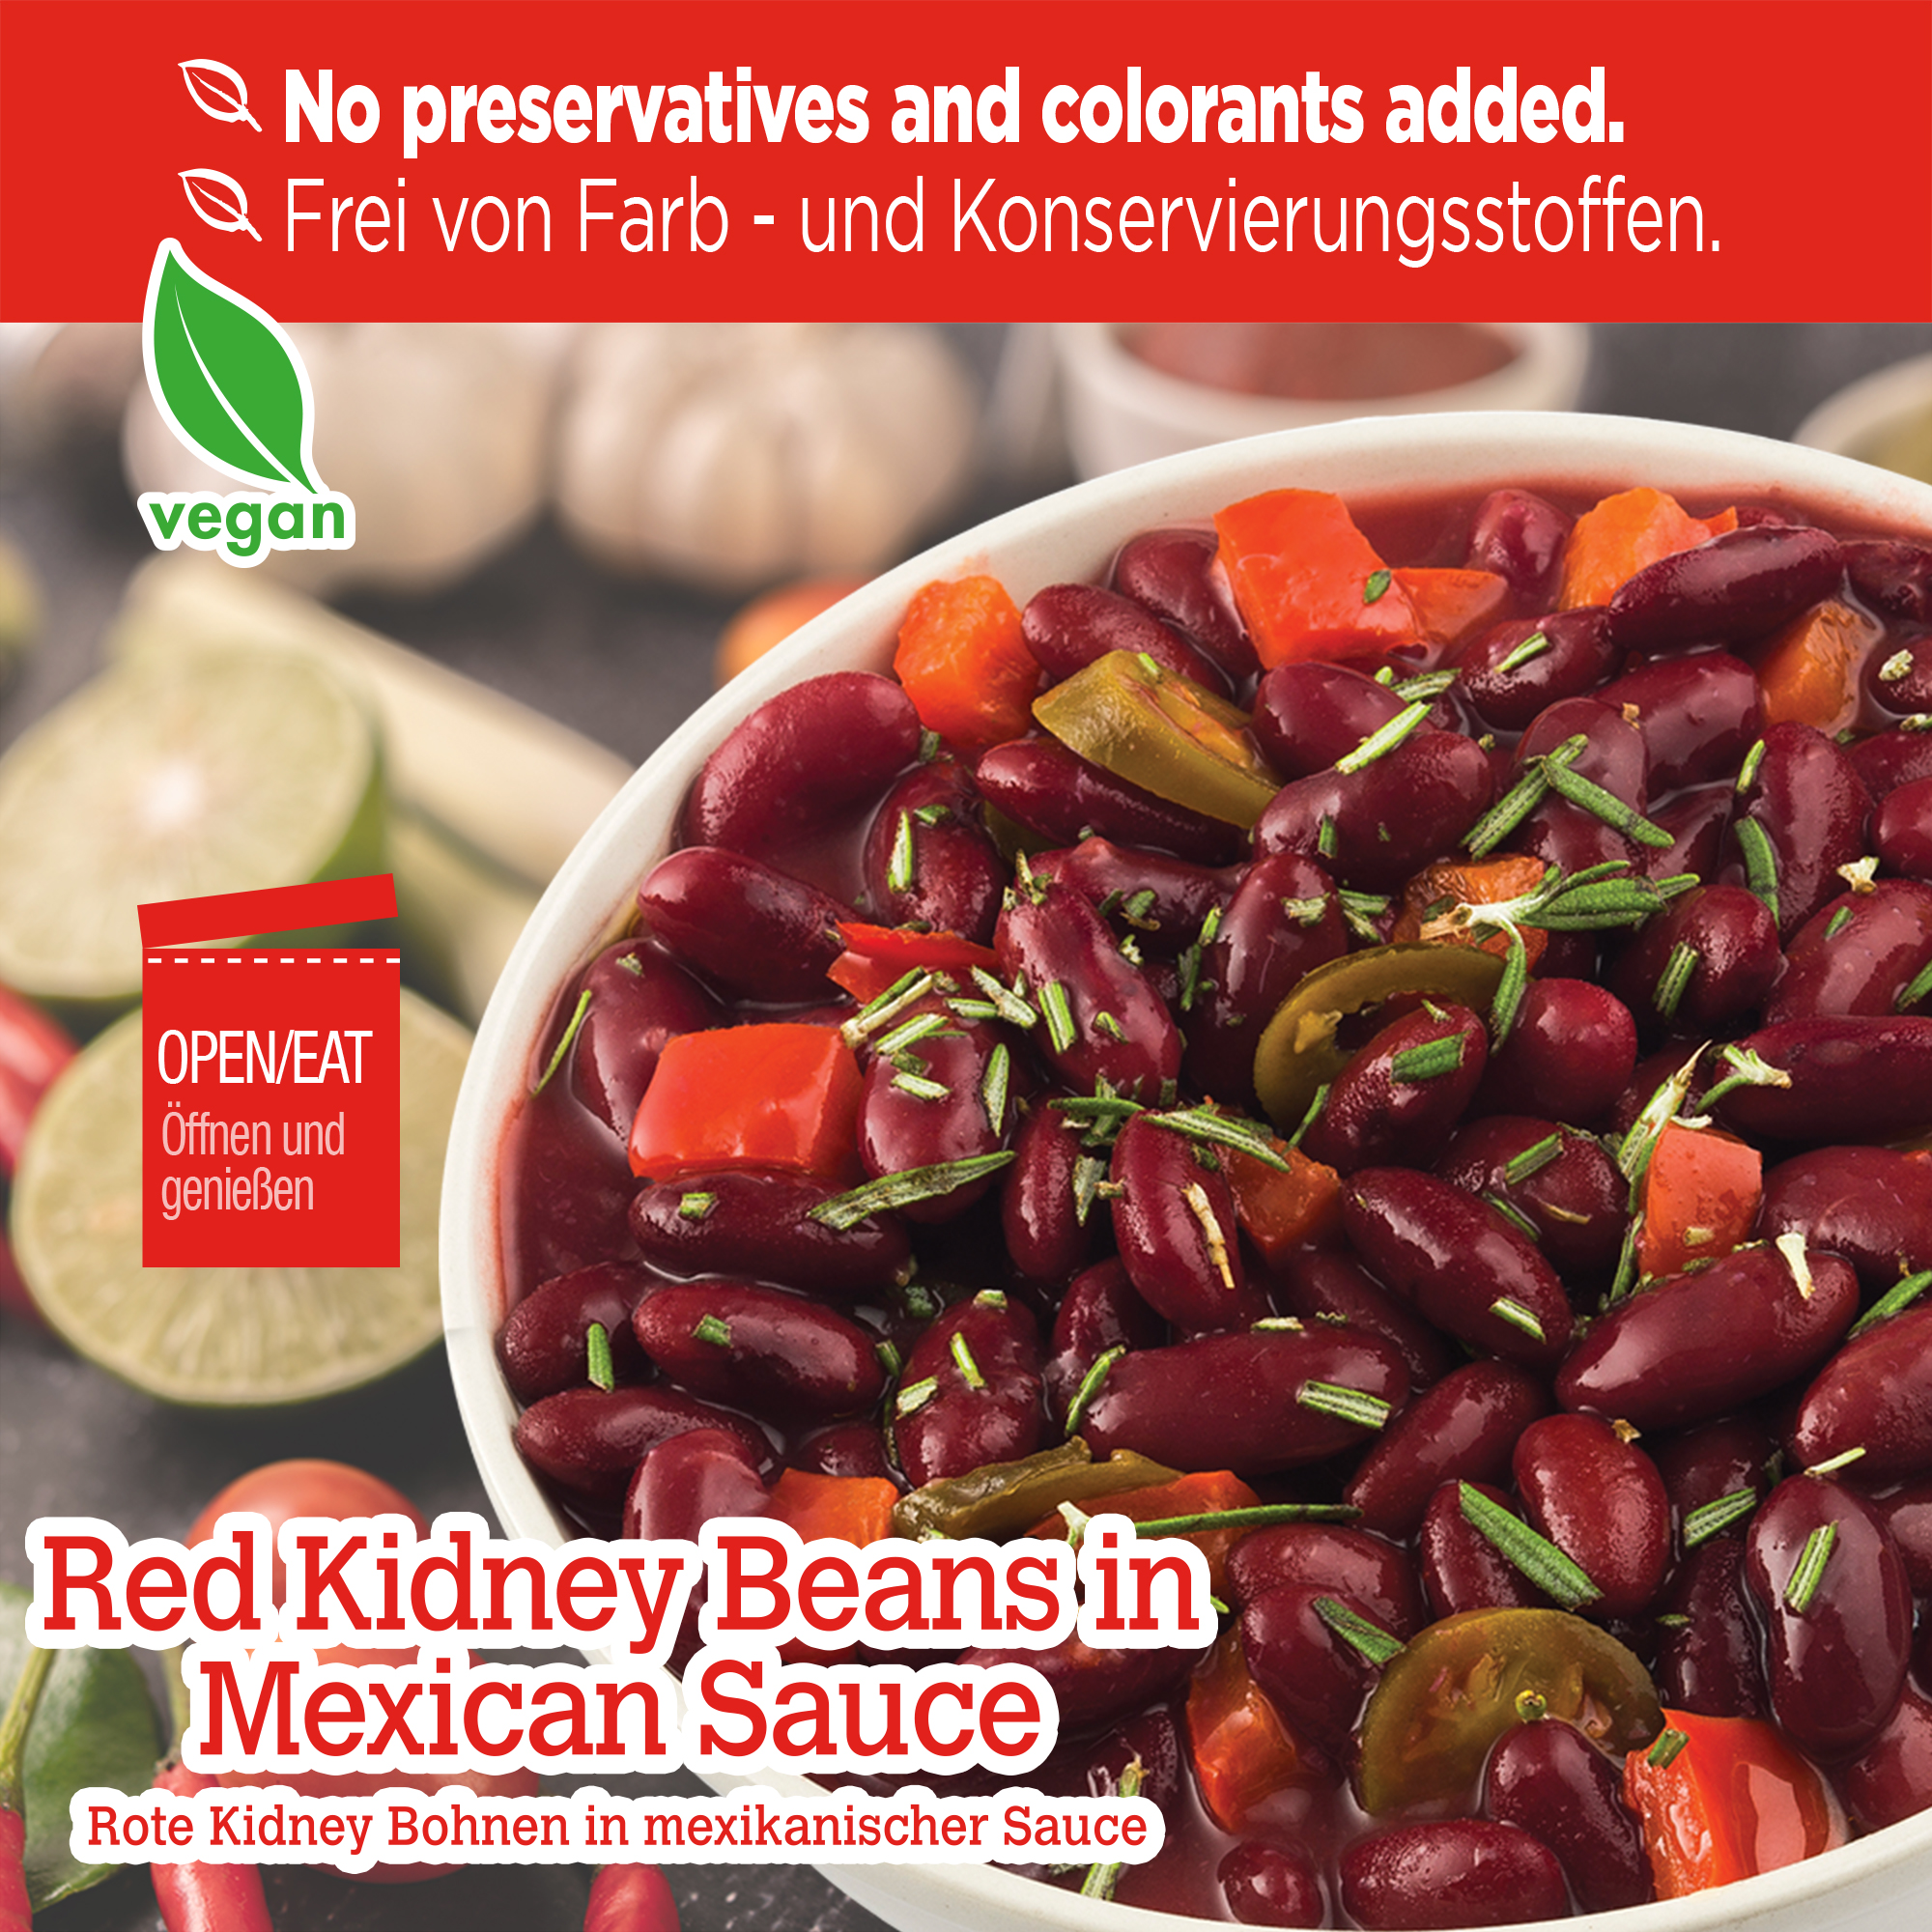 RED KIDNEY BEANS IN MEXICAN SAUCE